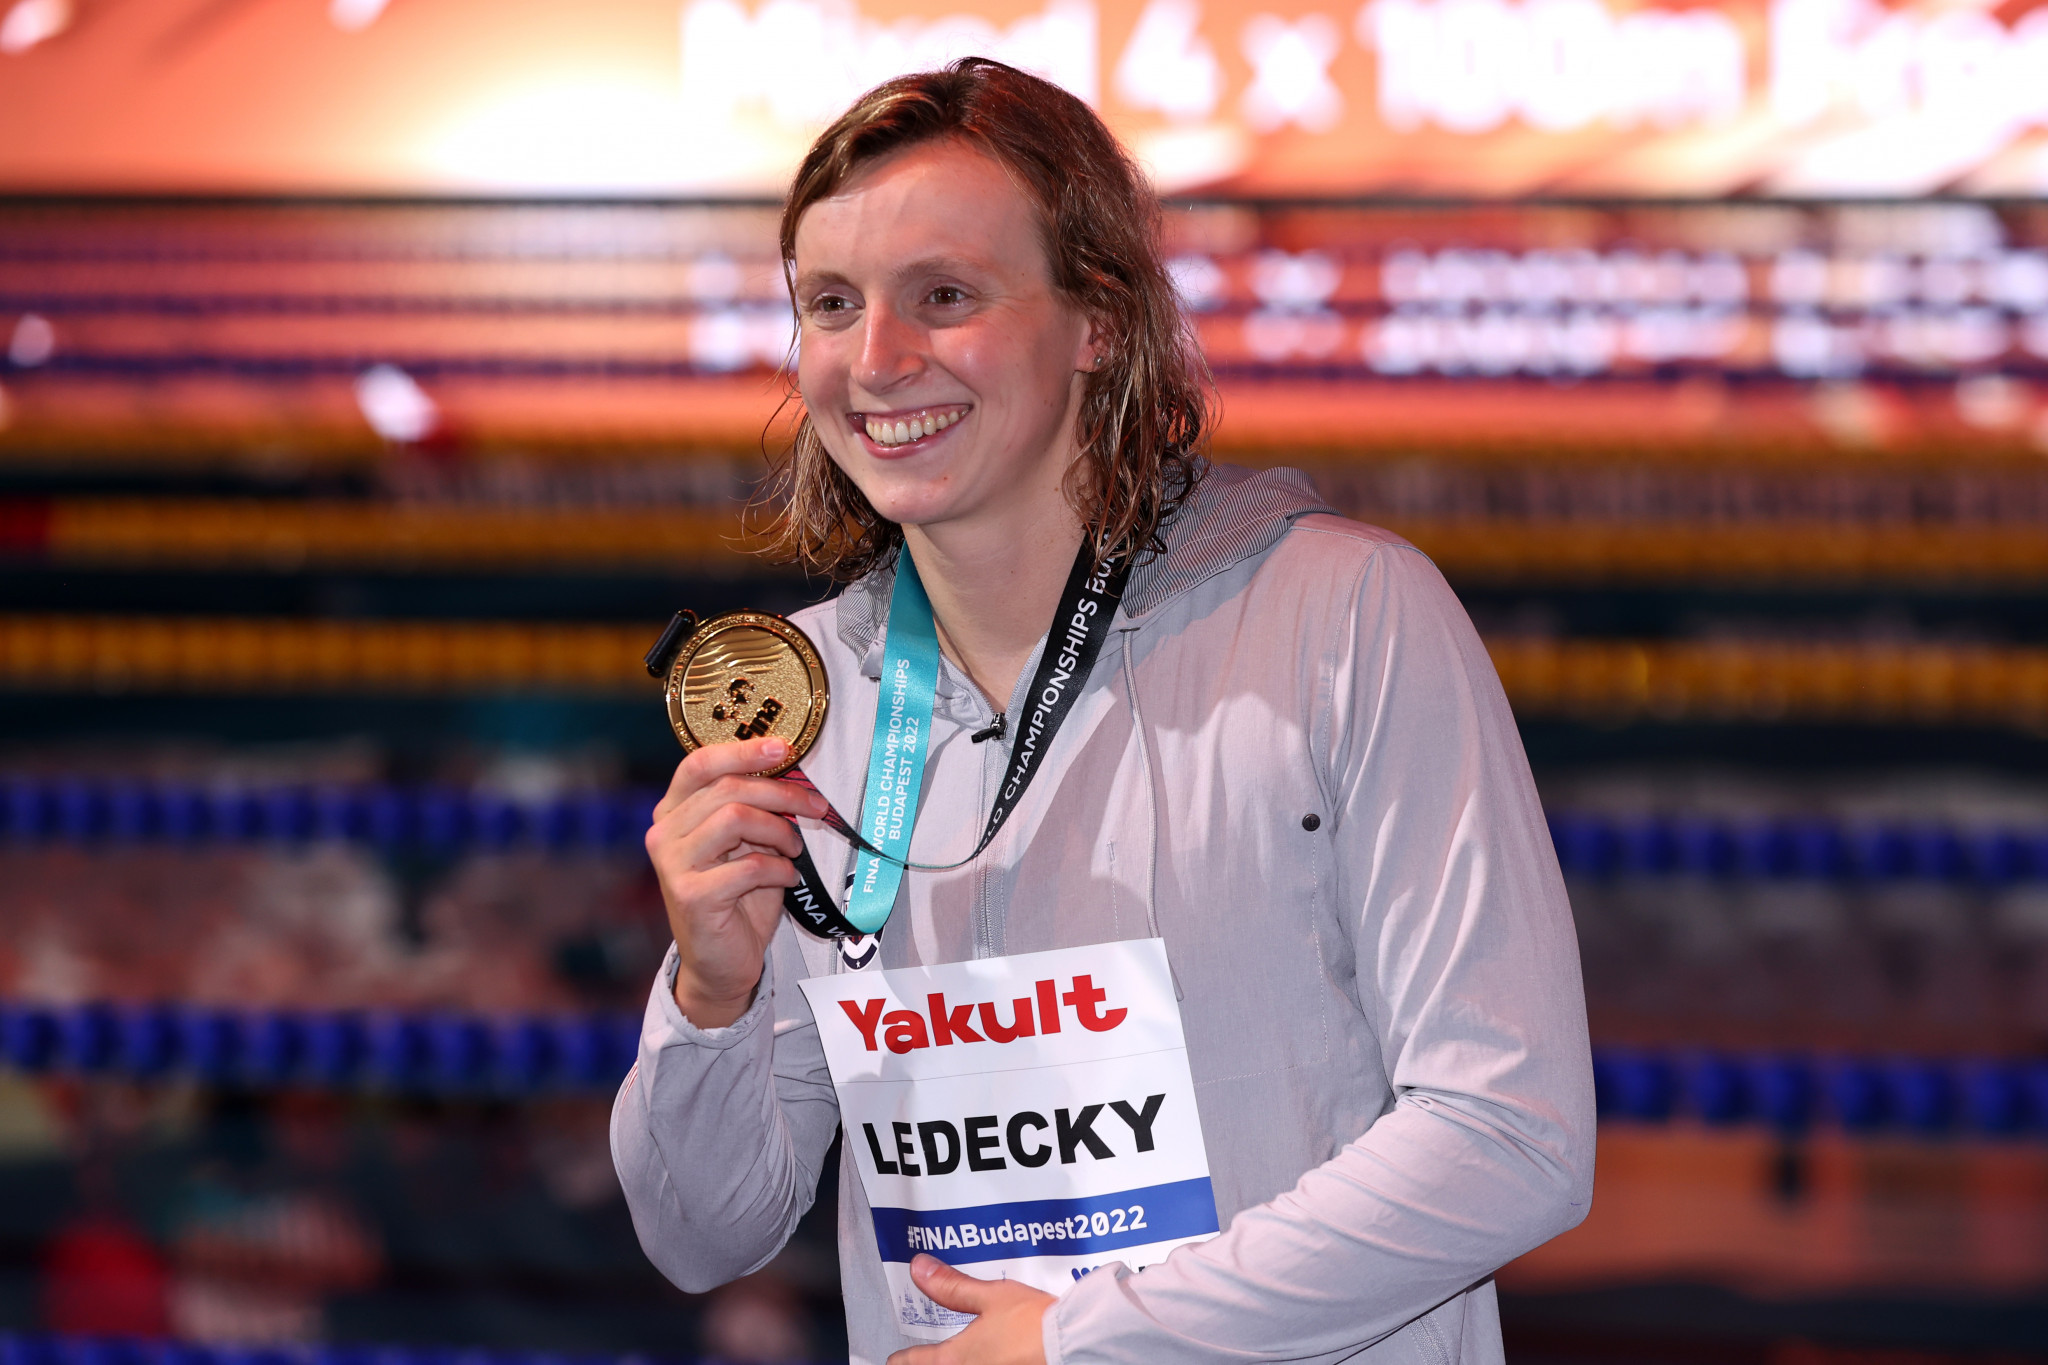 Ledecky wins 19th FINA World Championships gold medal on dramatic day in Budapest